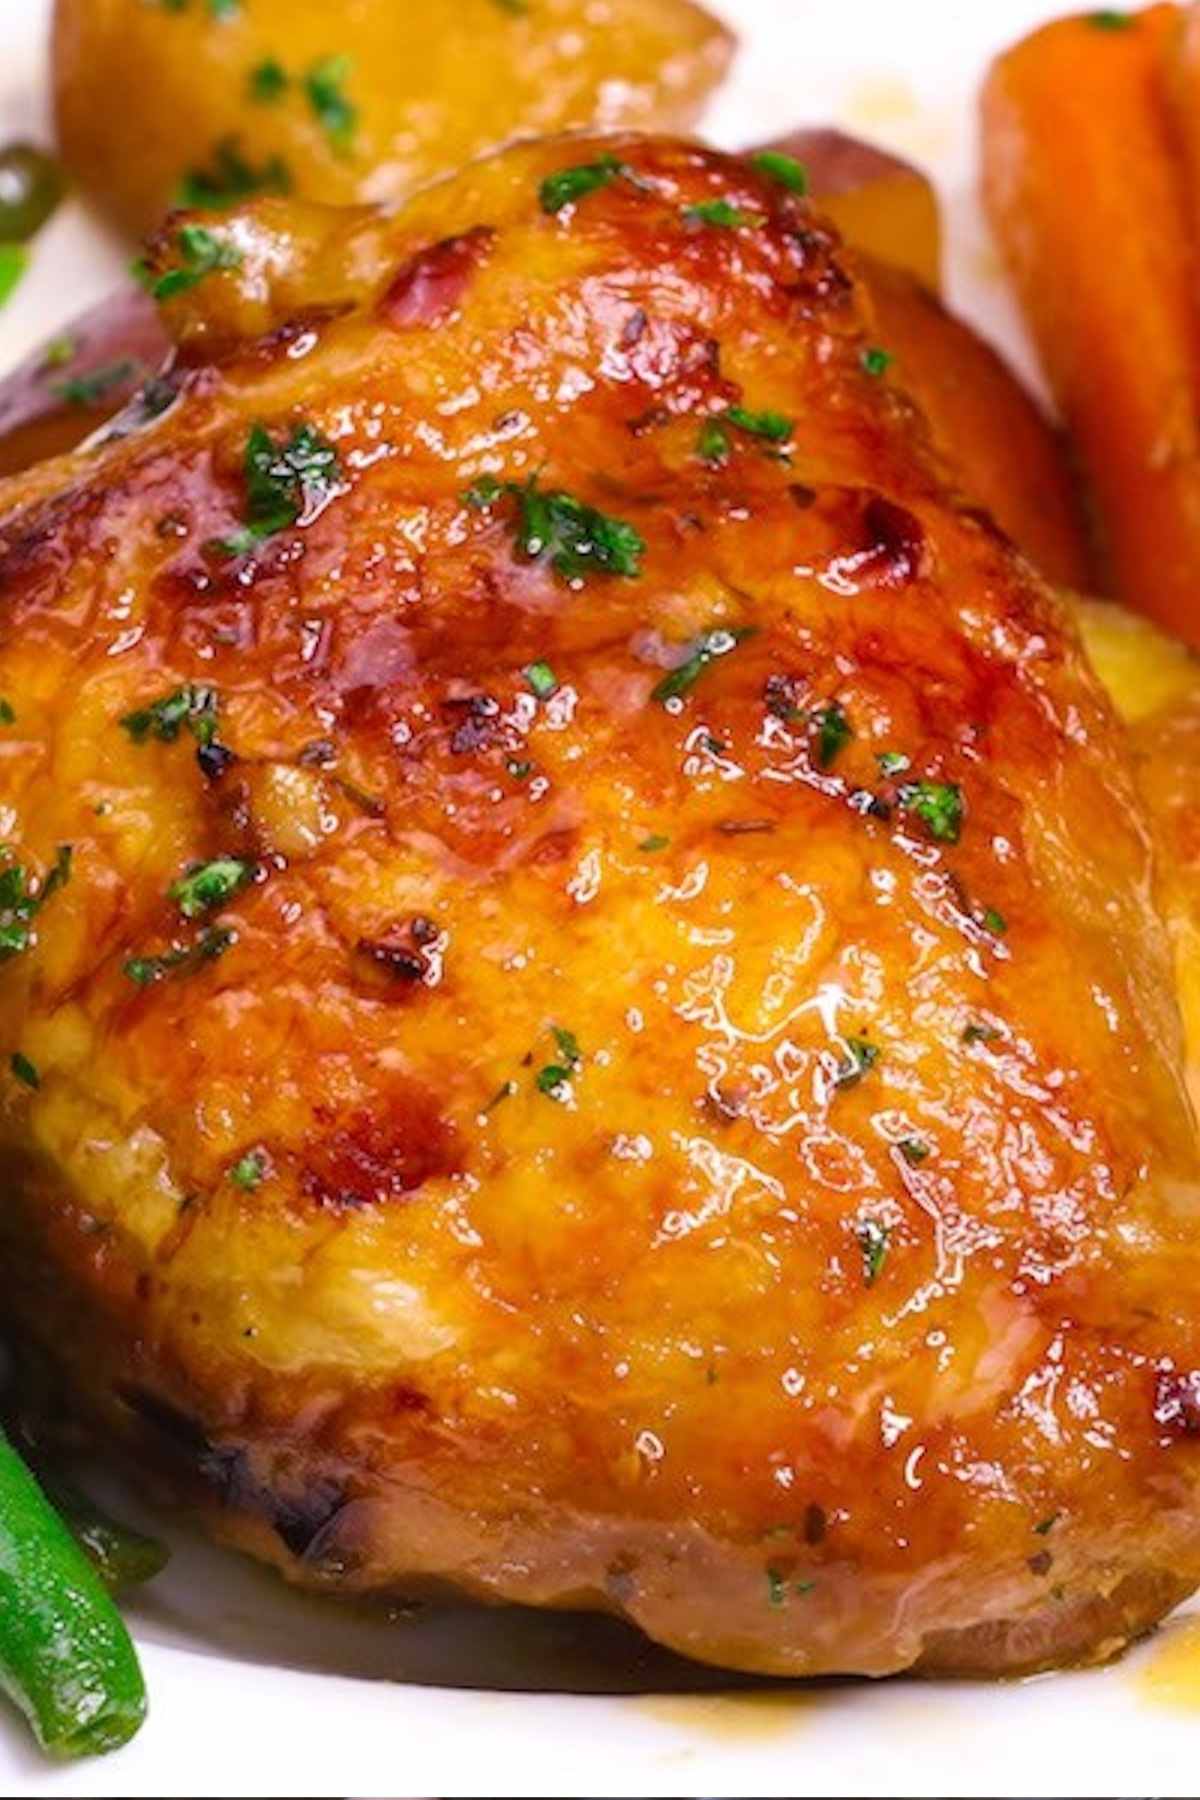 Marinating chicken is a sure fire way to inject it with flavor. This Asian chicken marinade uses a handful of ingredients and is a delicious combination of salty, sweet, and savory flavors.